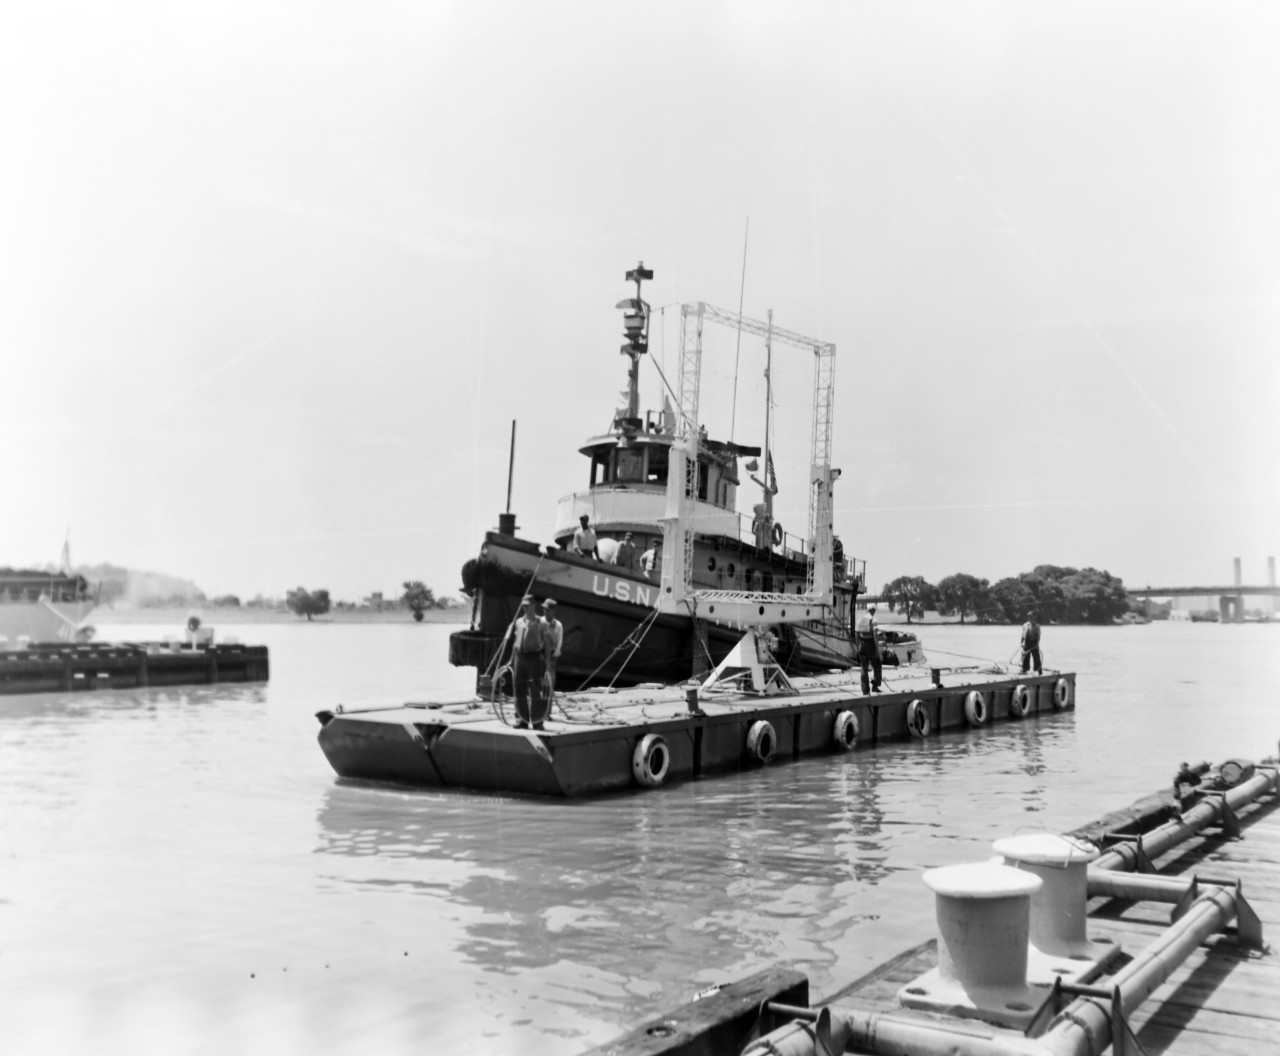 NMUSN-1014:   XAF Radar Antenna, 1960s.   Being delivered to the Washington Navy Yard for display.  Note the U.S. Navy tug alongside a small thin barge carrying the radar antenna.  The tug appears to be USS Wahtah (YTB-140).  This radar was the first shipboard radar to be installed onboard a U.S. Navy ship, USS New York (BB-34).  Surviving World War II, it was brought to the Washington Navy Yard where it was on exterior display until the mid-1980s where it was placed into storage.   Following conservation, the radar is now on display at the National Electronics Museum, Linthicum, Maryland.    Original is a black and white negative.   National Museum of the U.S. Navy Photograph Collection.